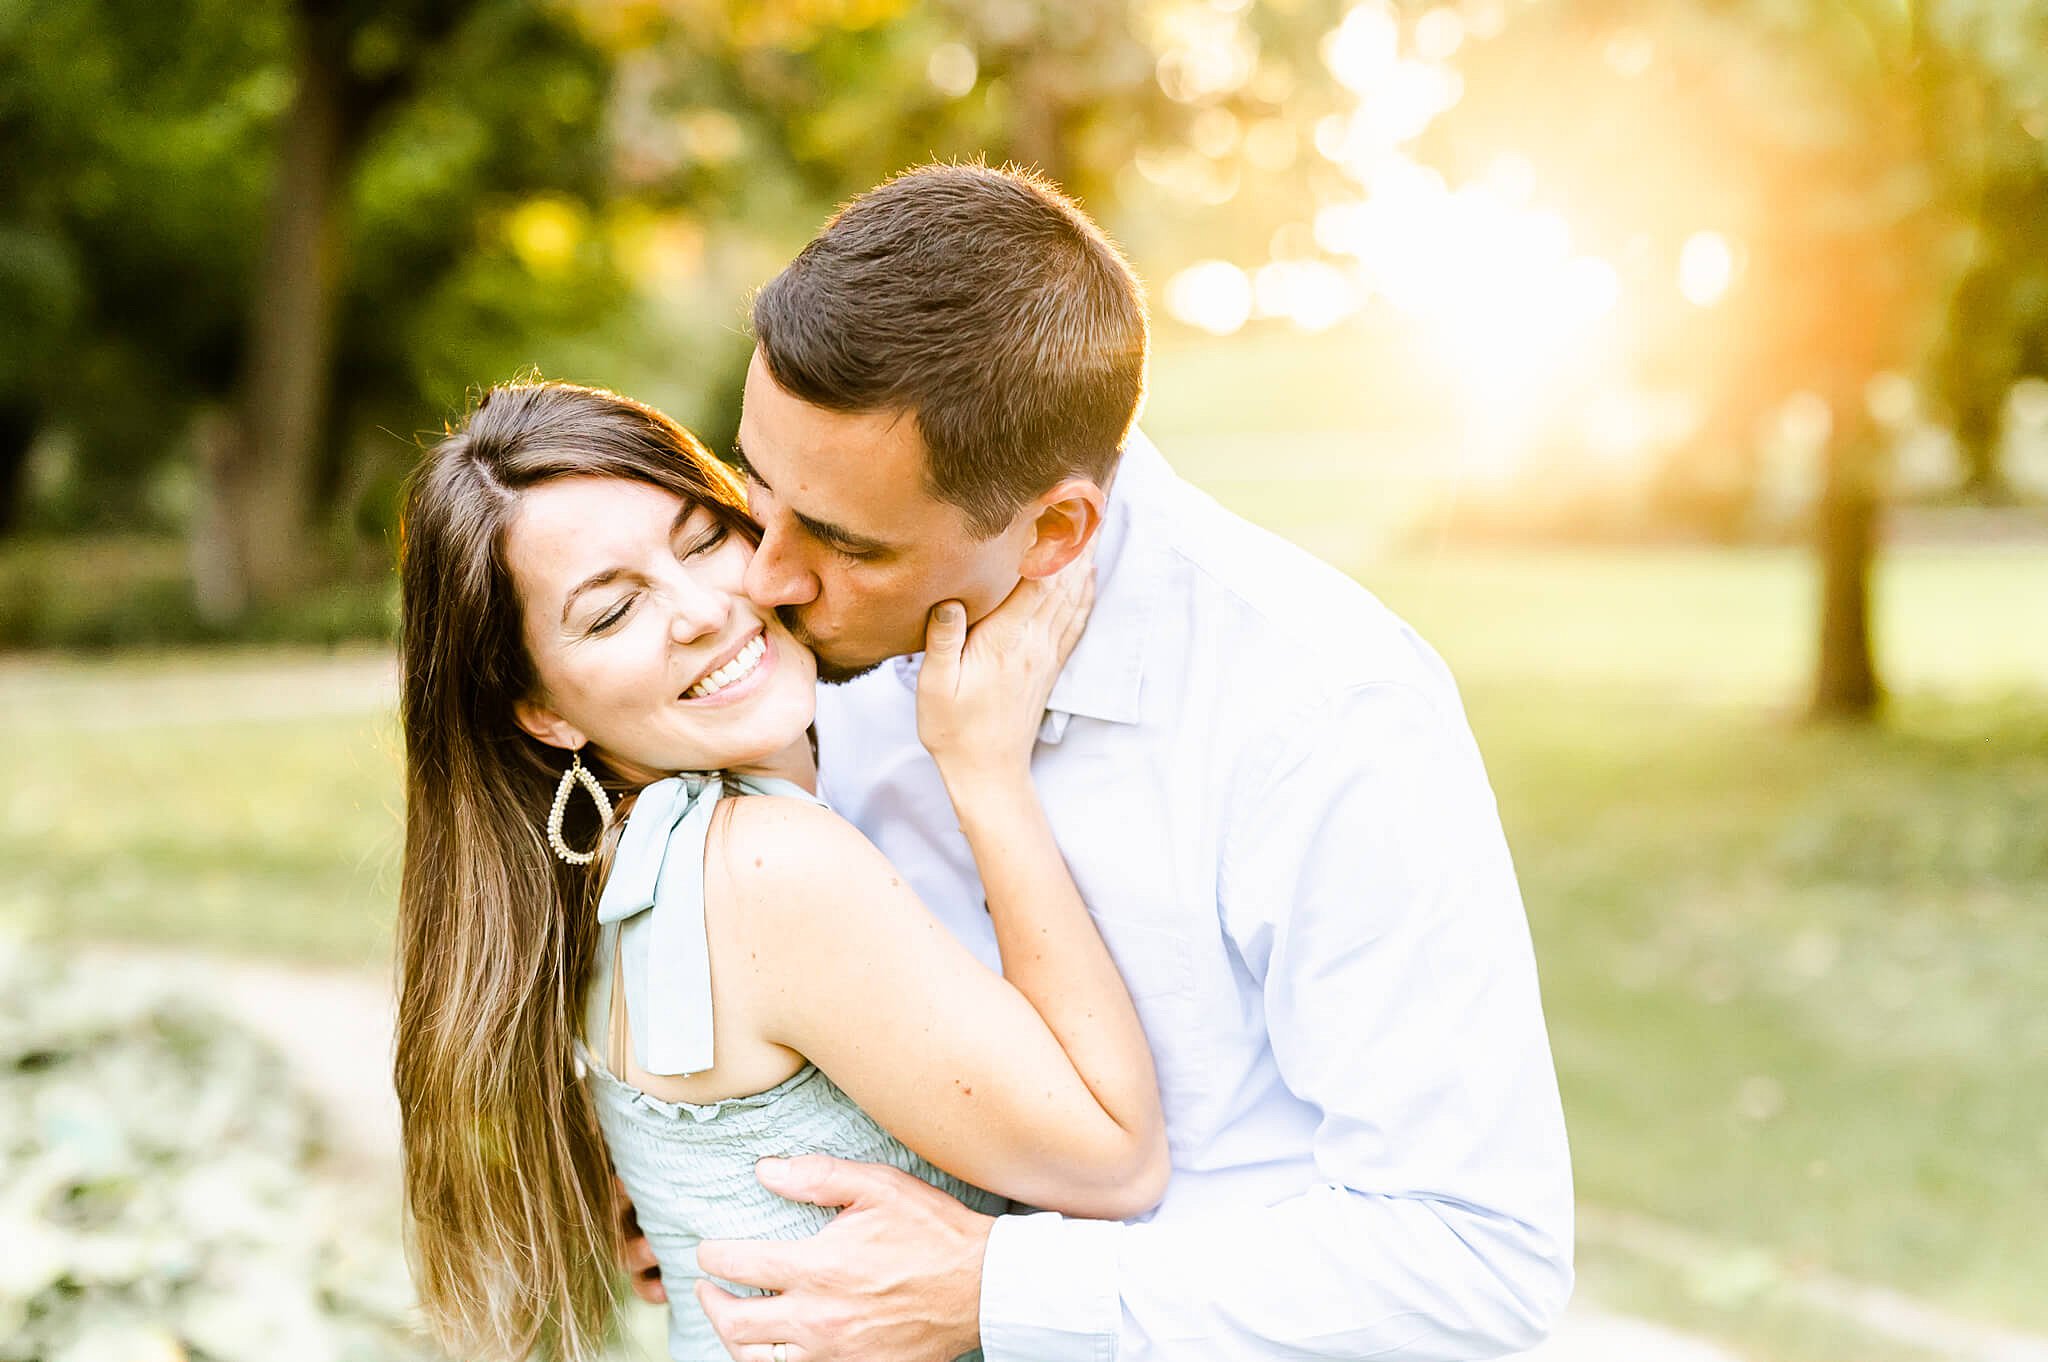 Man kisses girlfriend on the cheek in a blue collared shirt in a green grassy park at sunset